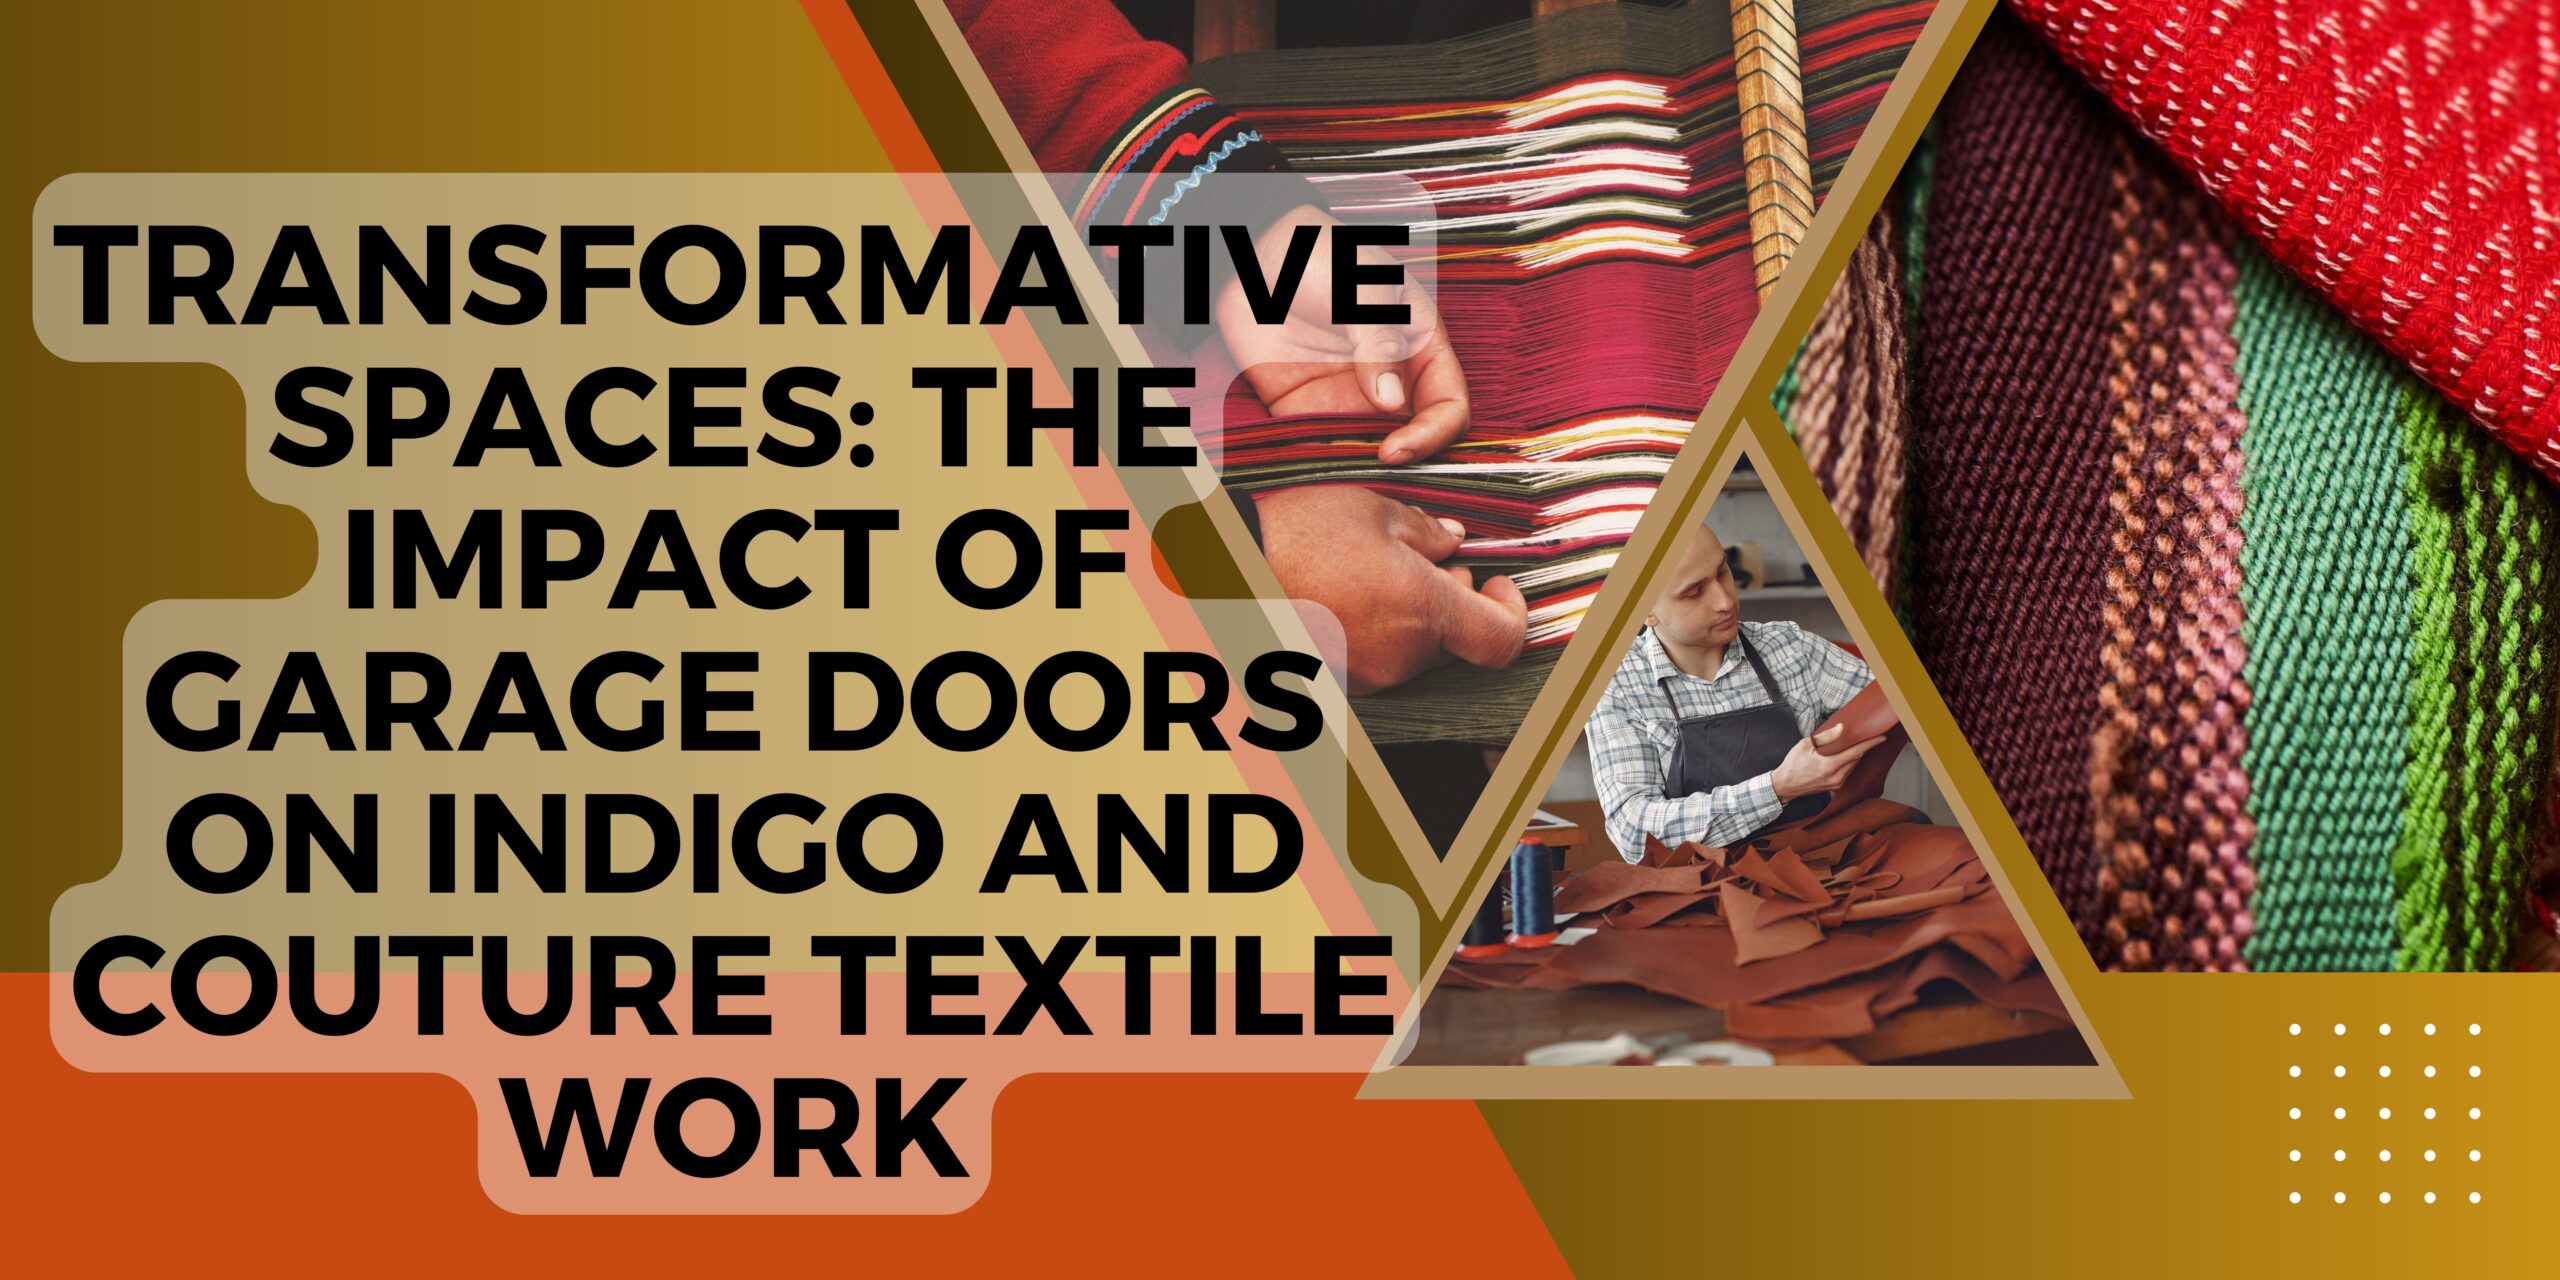 Transformative Spaces: The Impact of Garage Doors on Indigo and Couture Textile Work